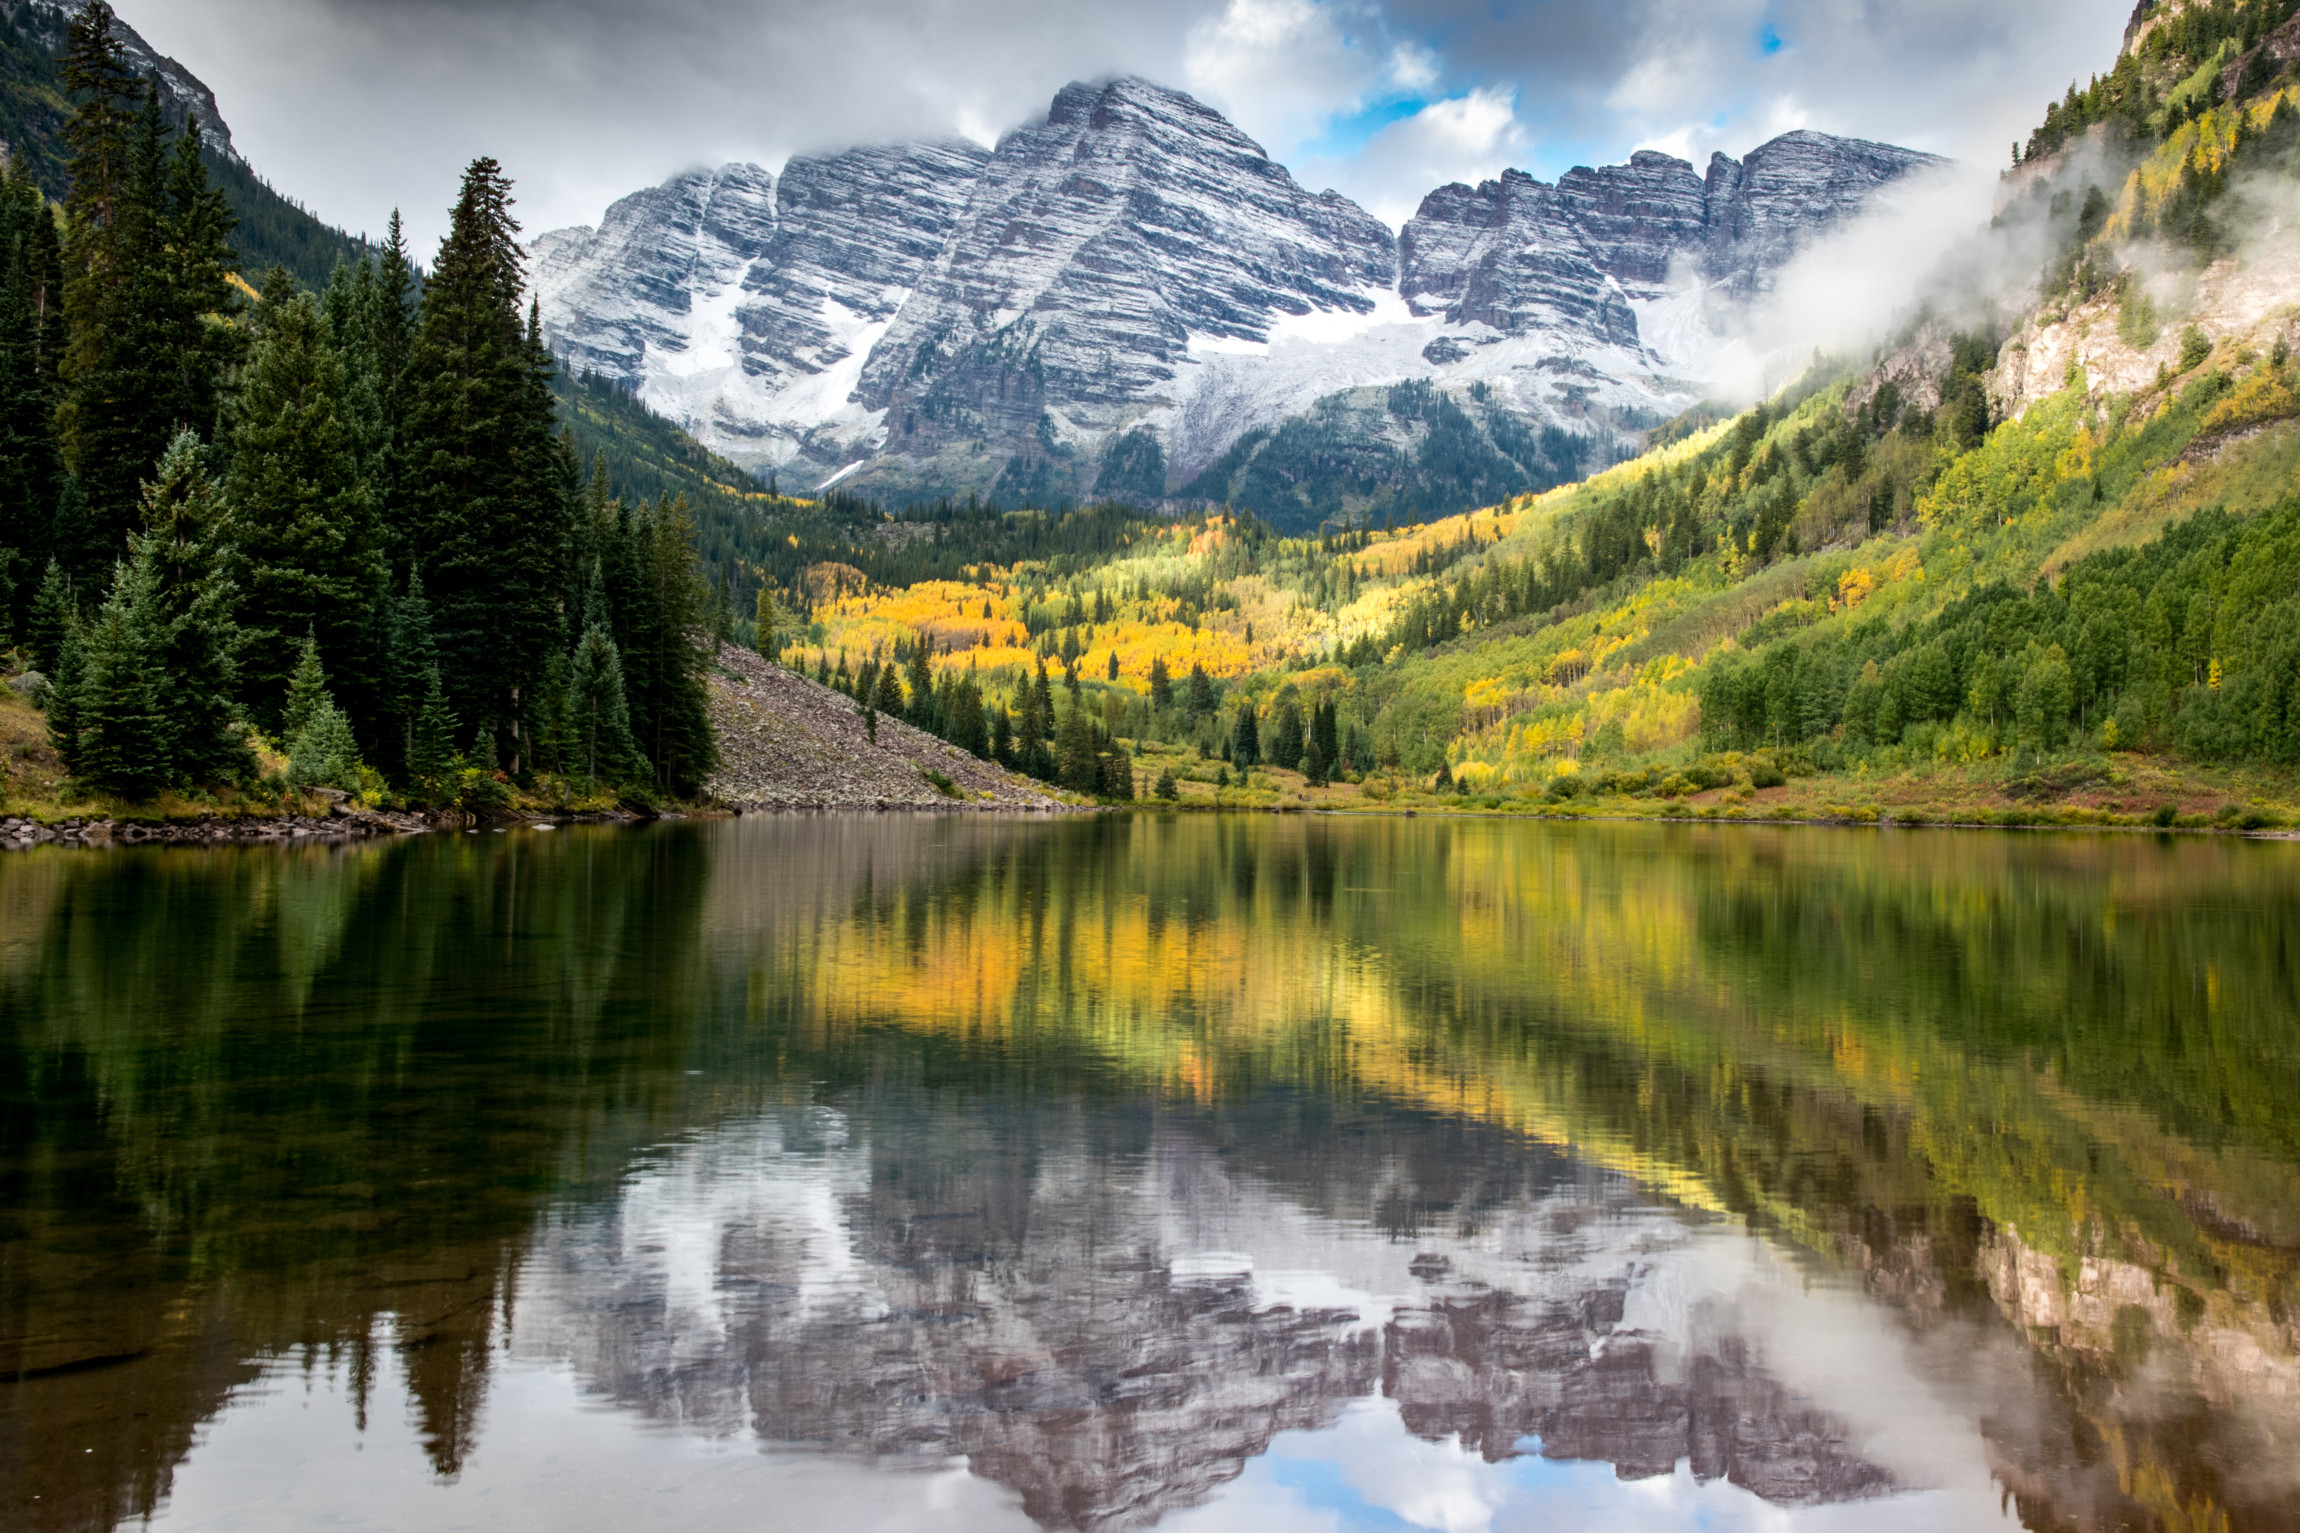 From The Manual Travel: Aspen Autumn’s Golden Leaves and Good Food